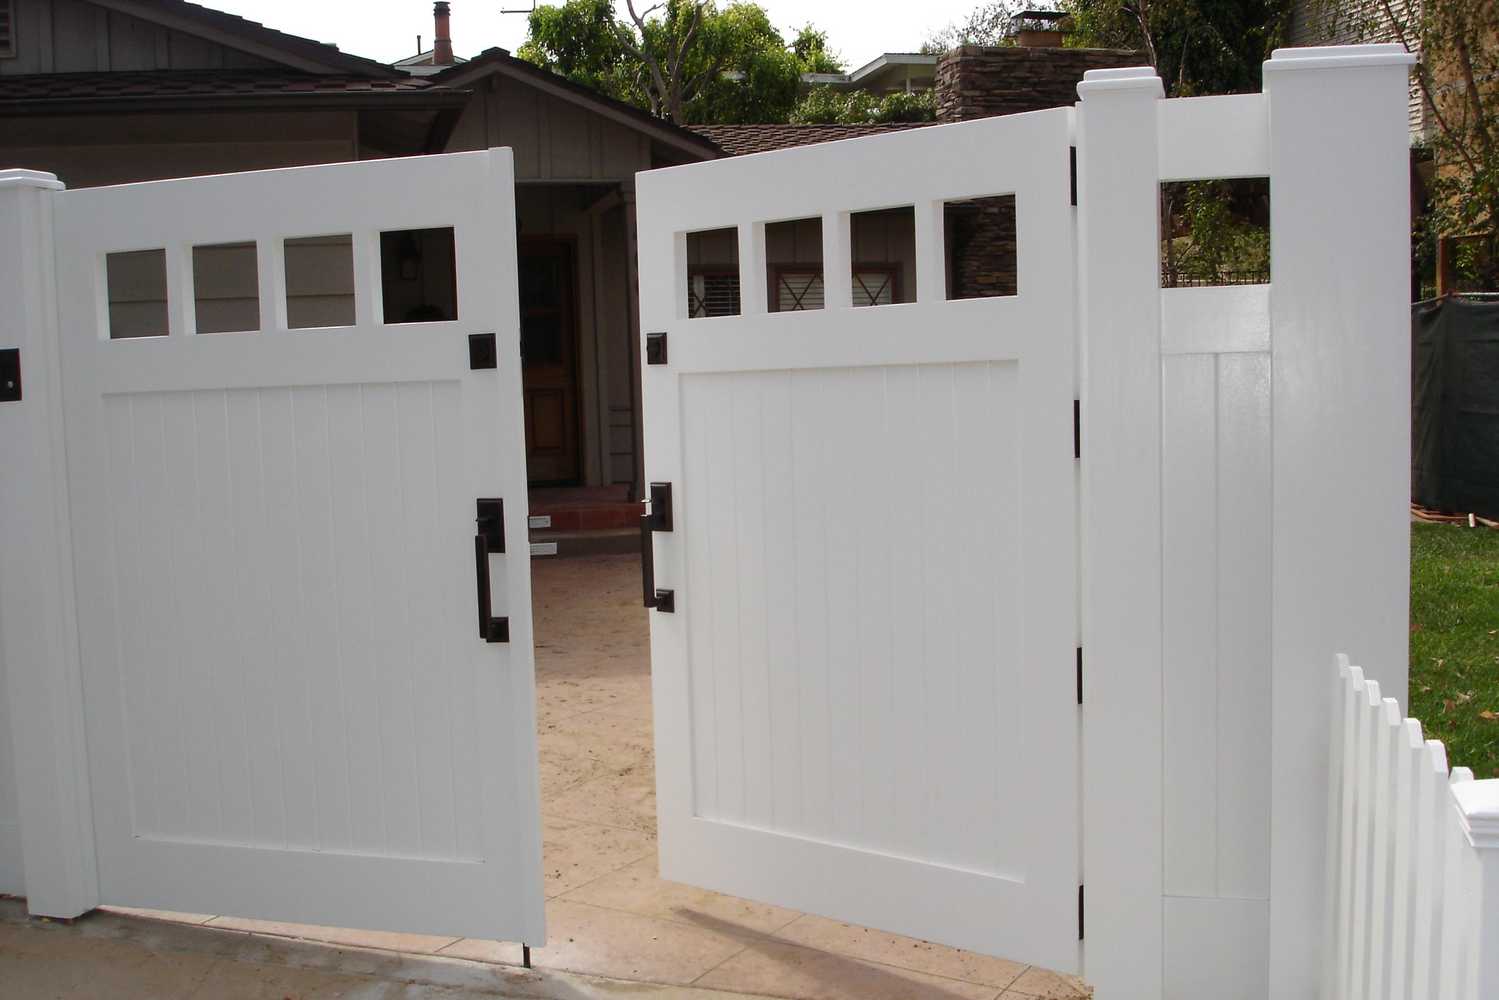 Handcrafted Architectural Gates and Doors